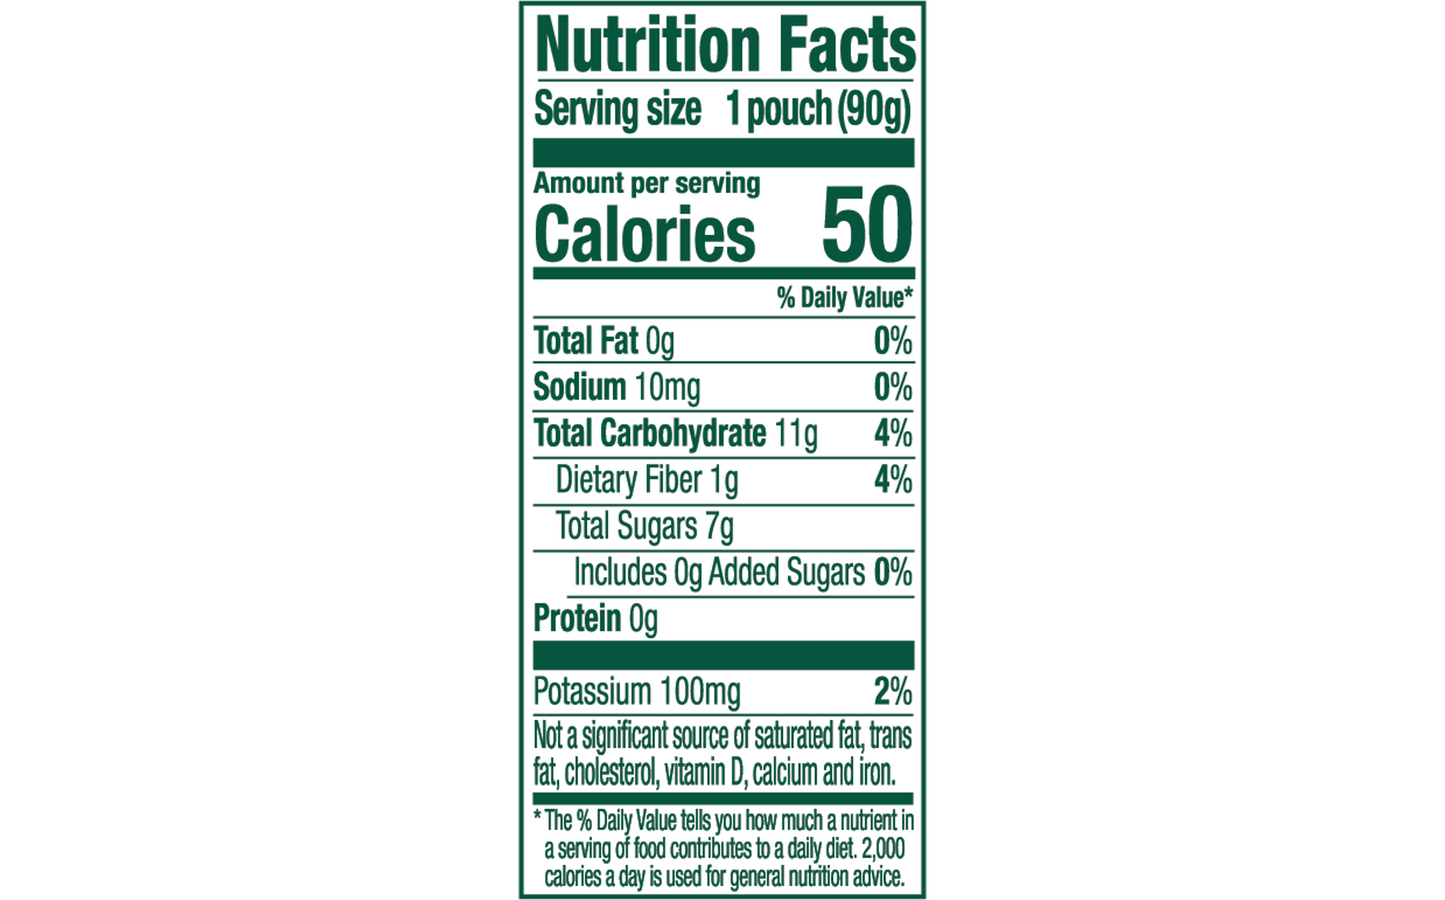 Nutrition facts for Buddy Fruits Pear, Spinach & Apple fruit & veggies pouch.